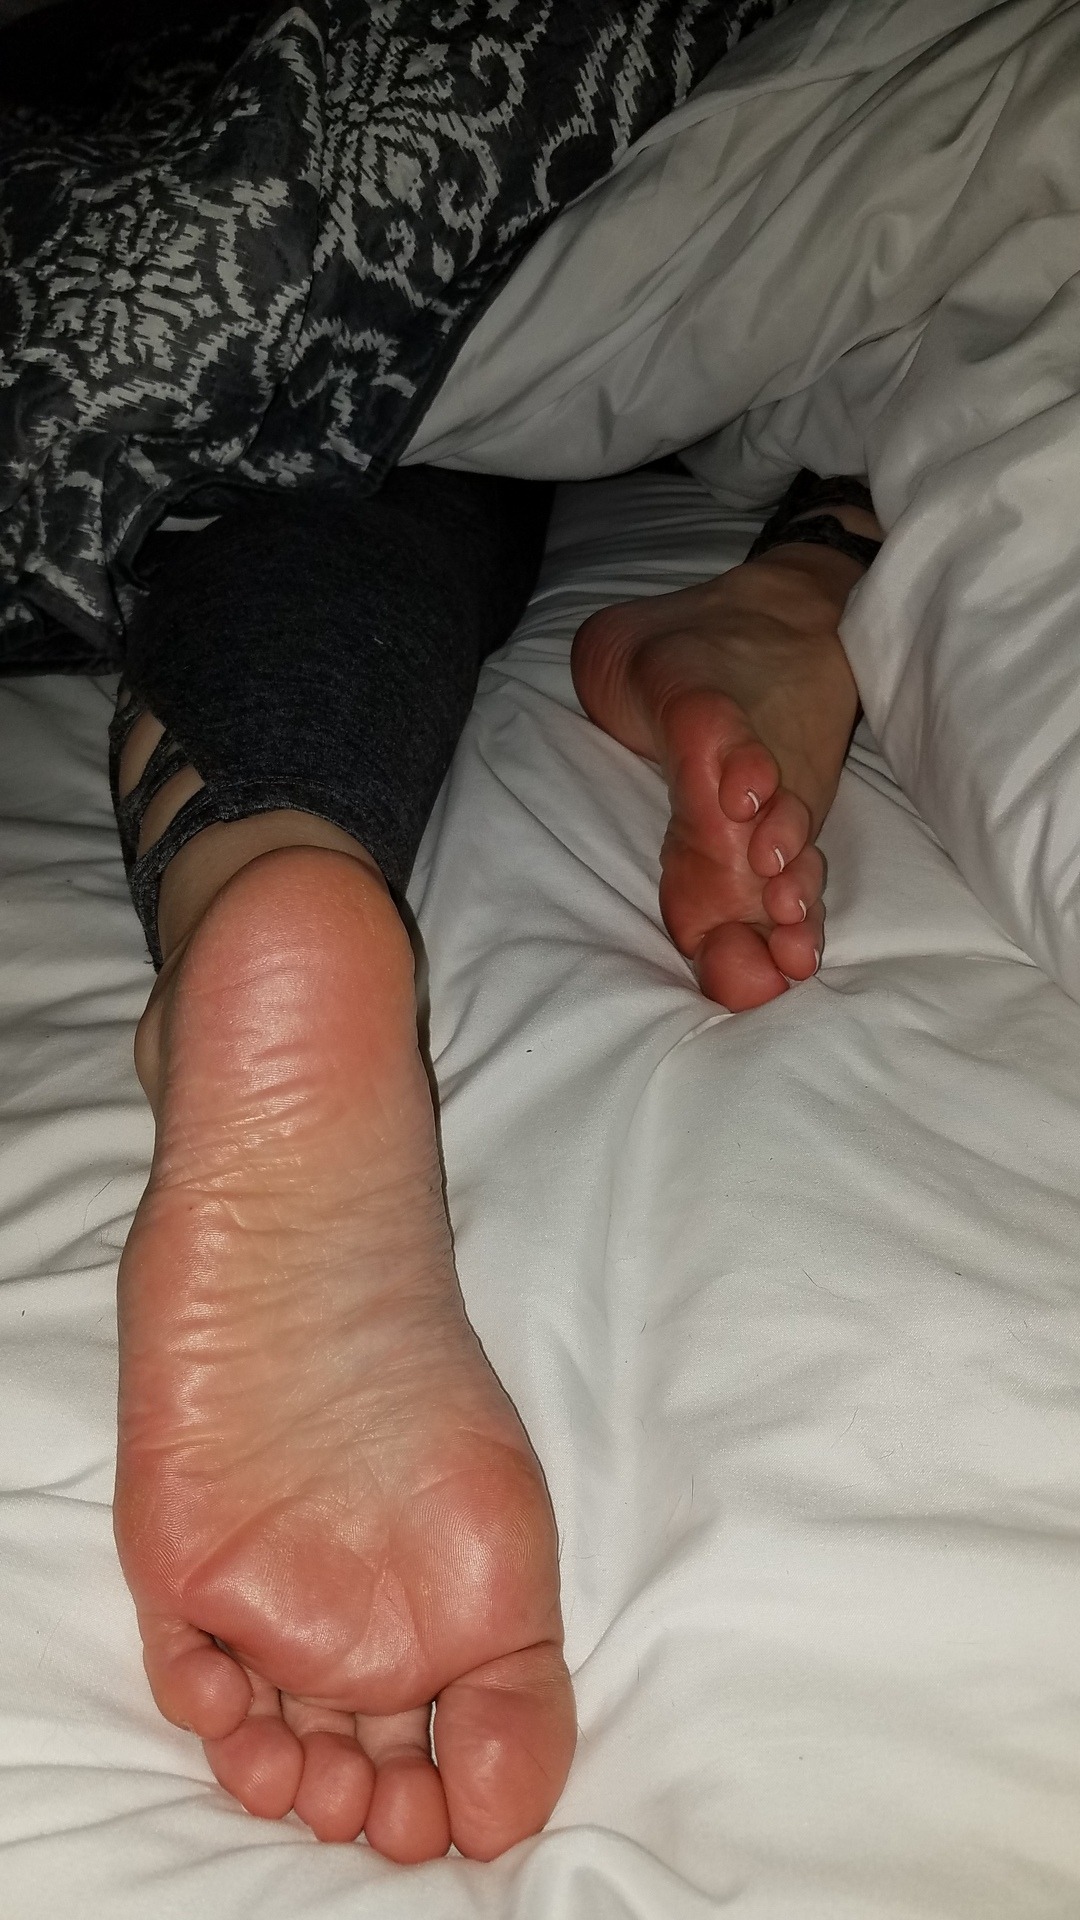 Candid,homemade and all original pics — My pretty wifes sexy sleeping soles.please comment